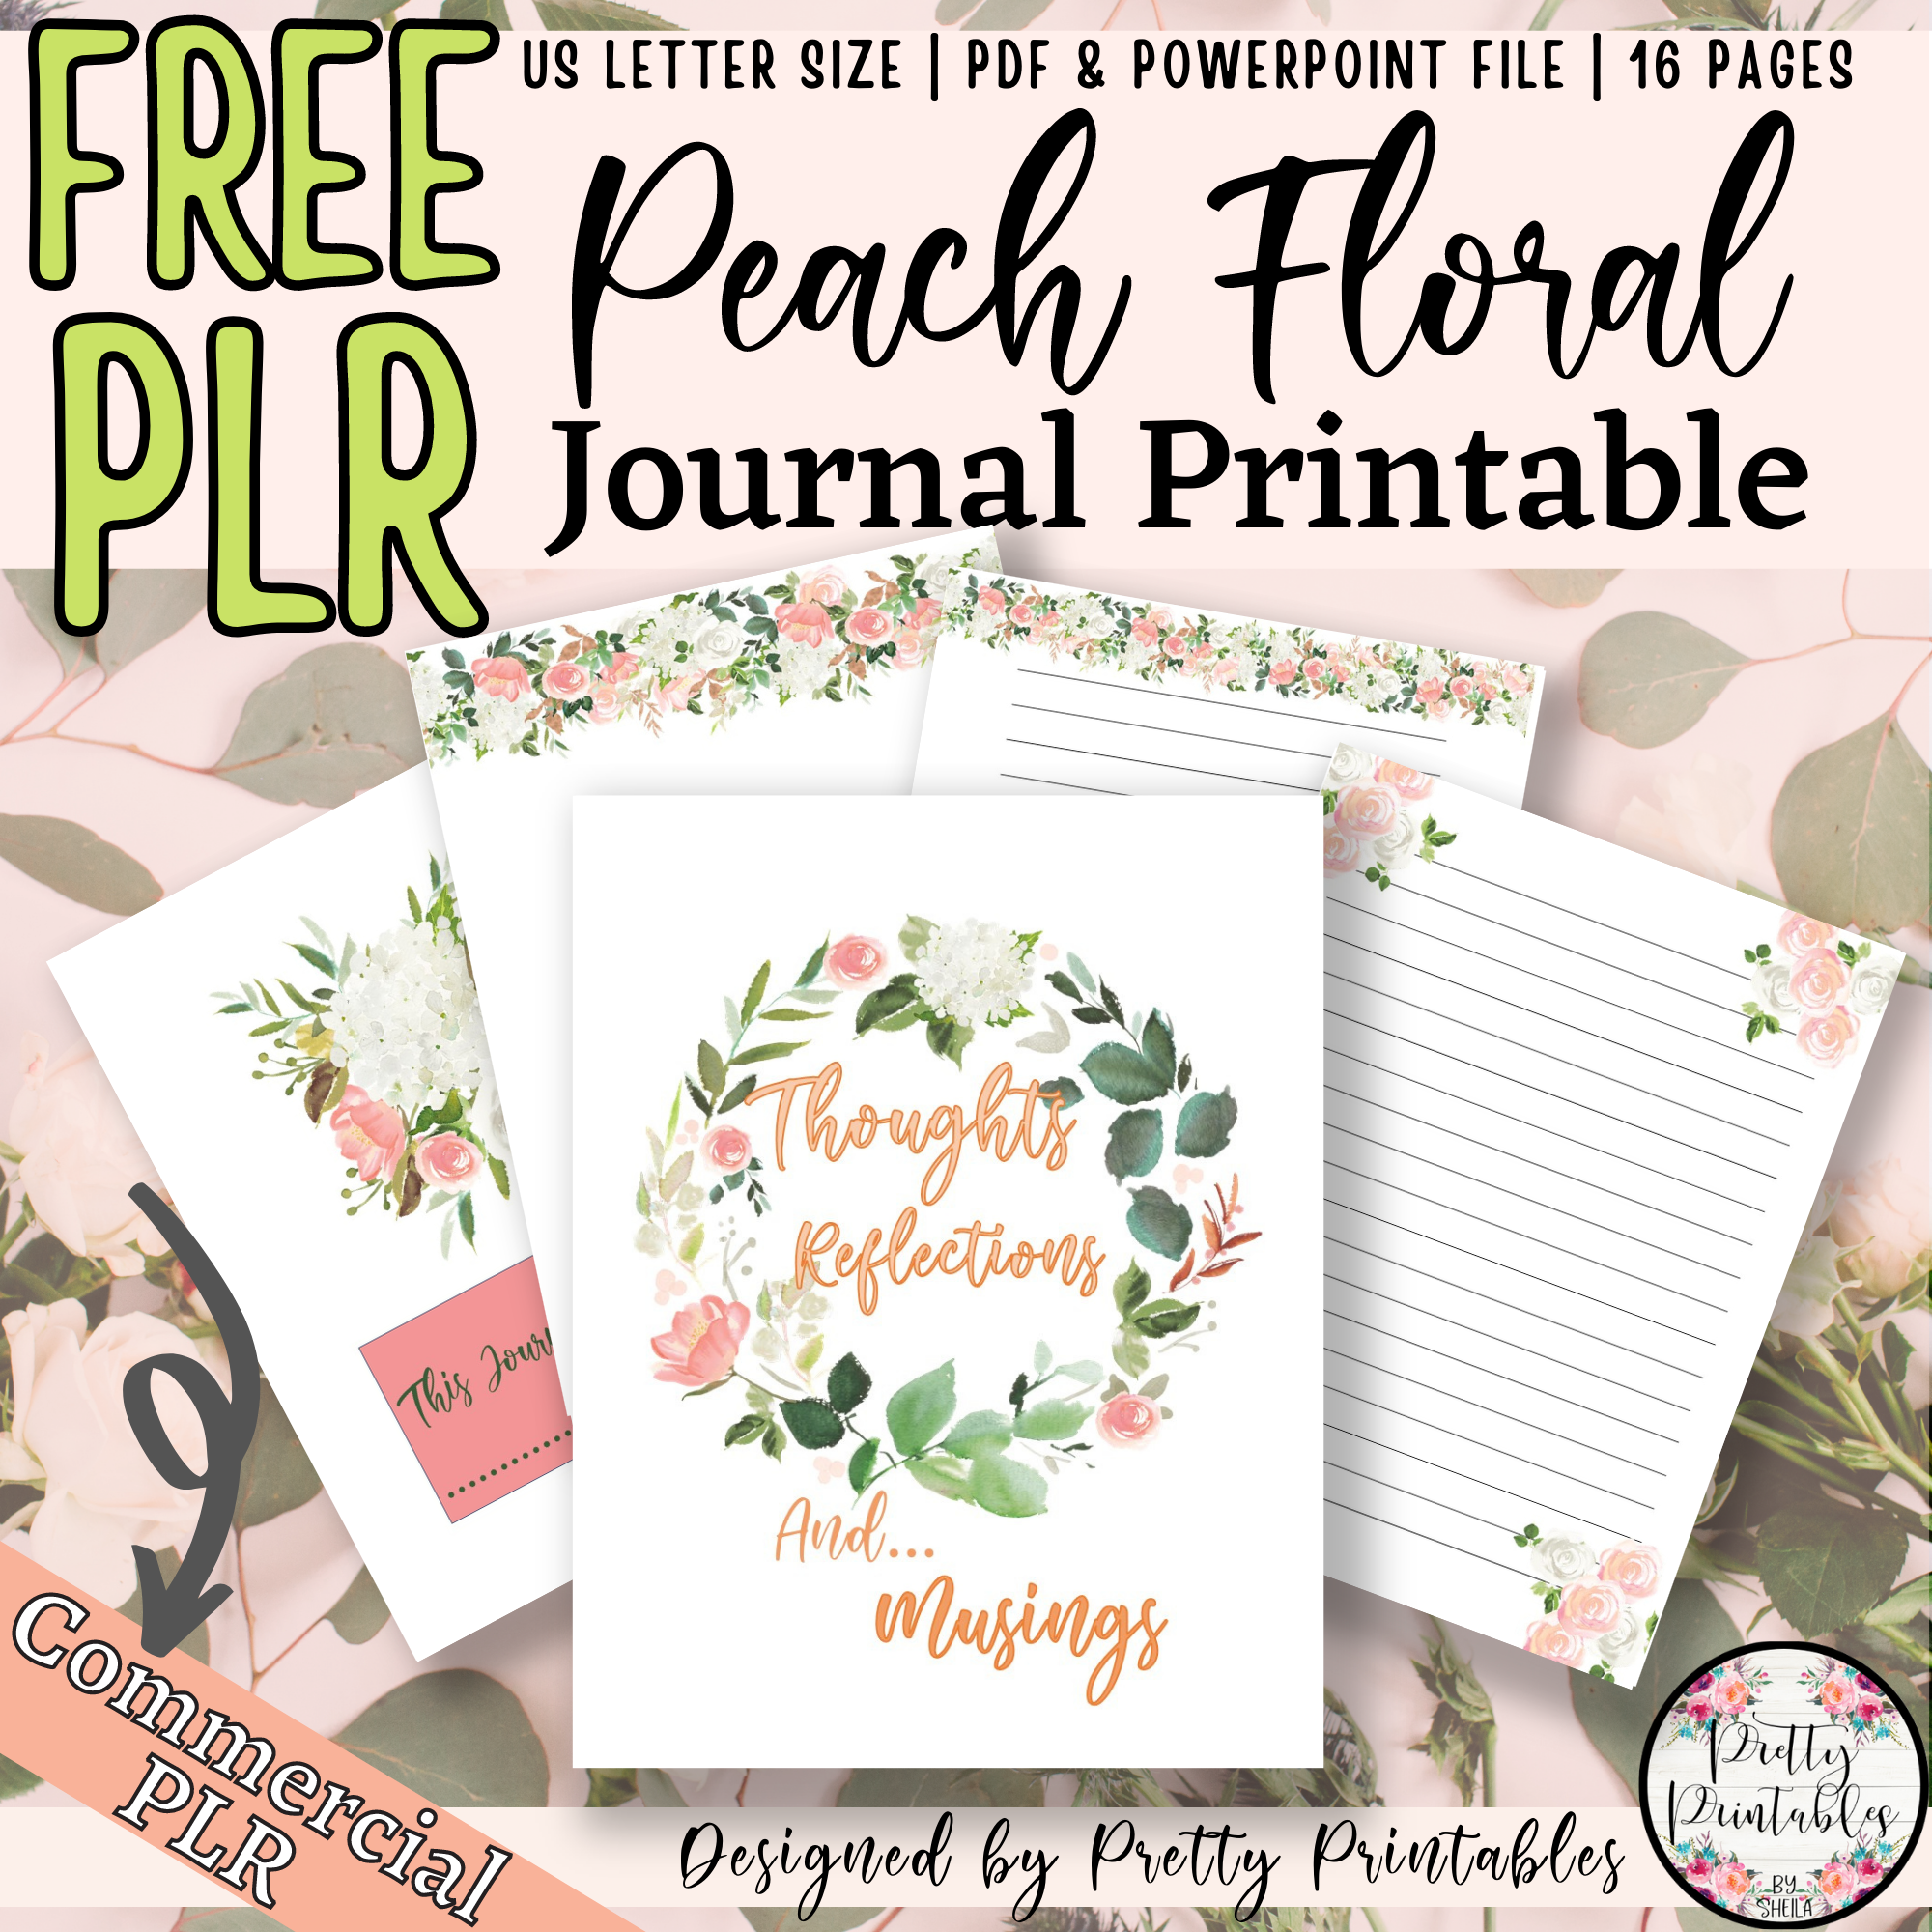 FREE Peach Floral Journal Printable Template Commercial PLR